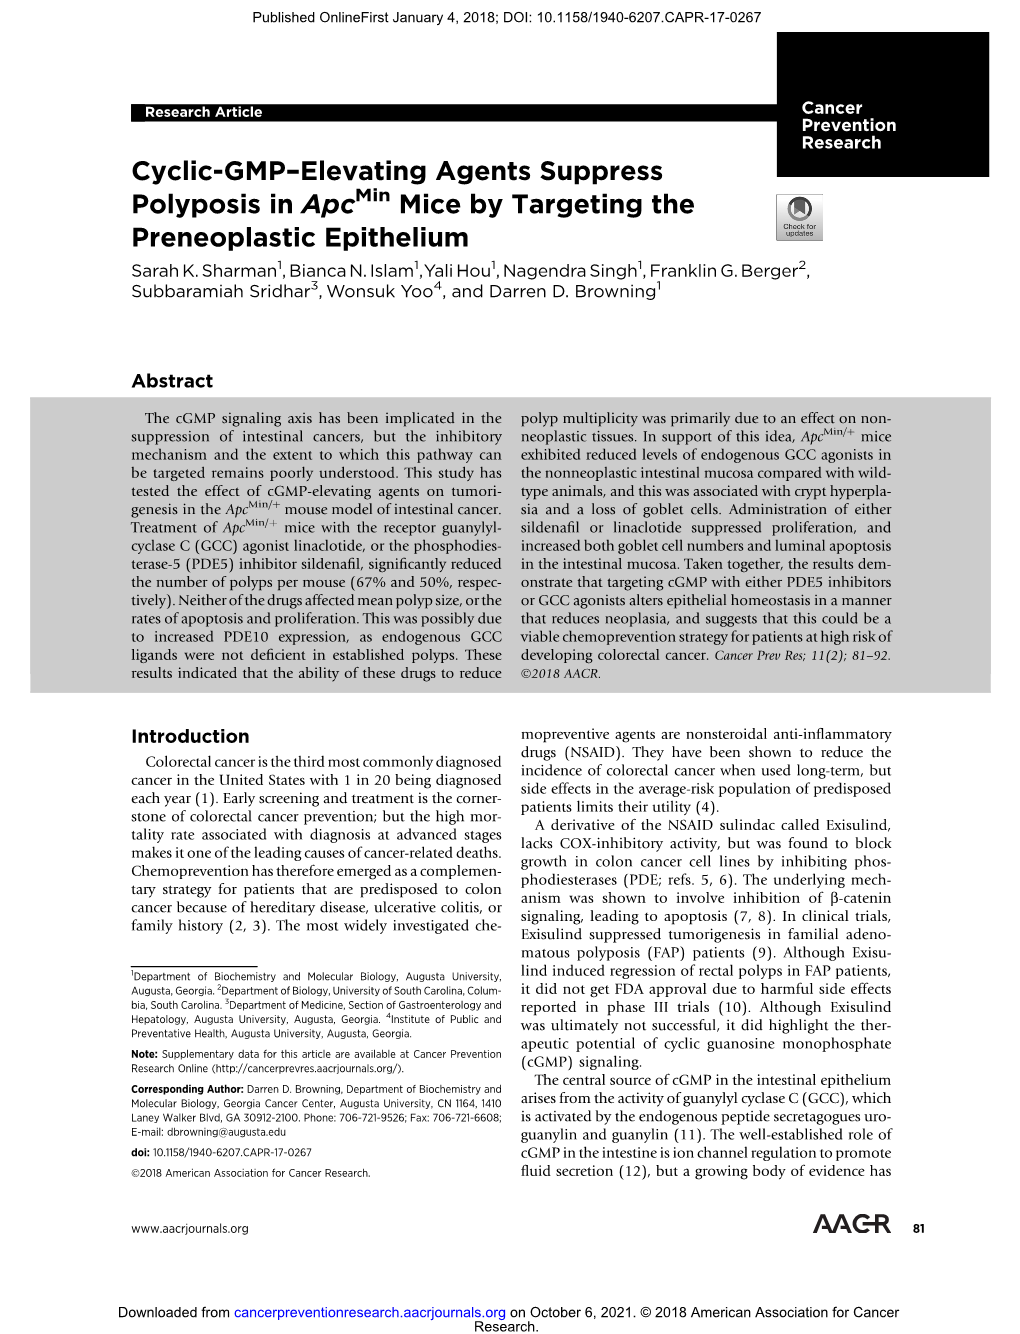 Cyclic-GMP–Elevating Agents Suppress Polyposis in Apc Mice By